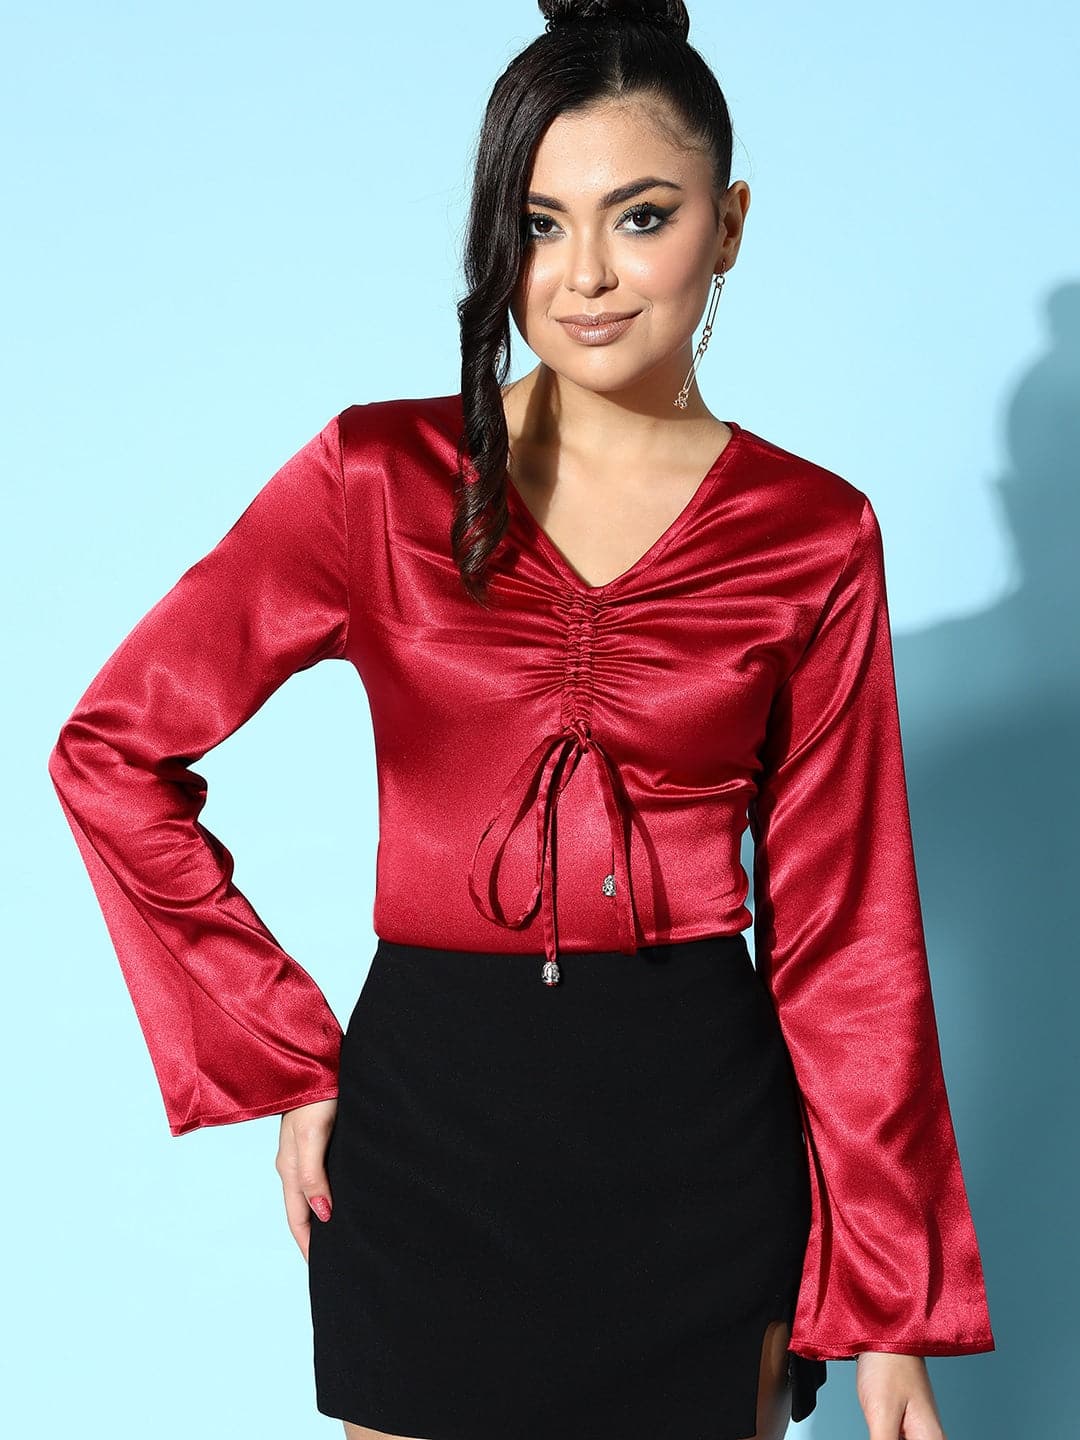 Women's Red Lycra Satin Ruched Bell Sleeves Top - Lyush